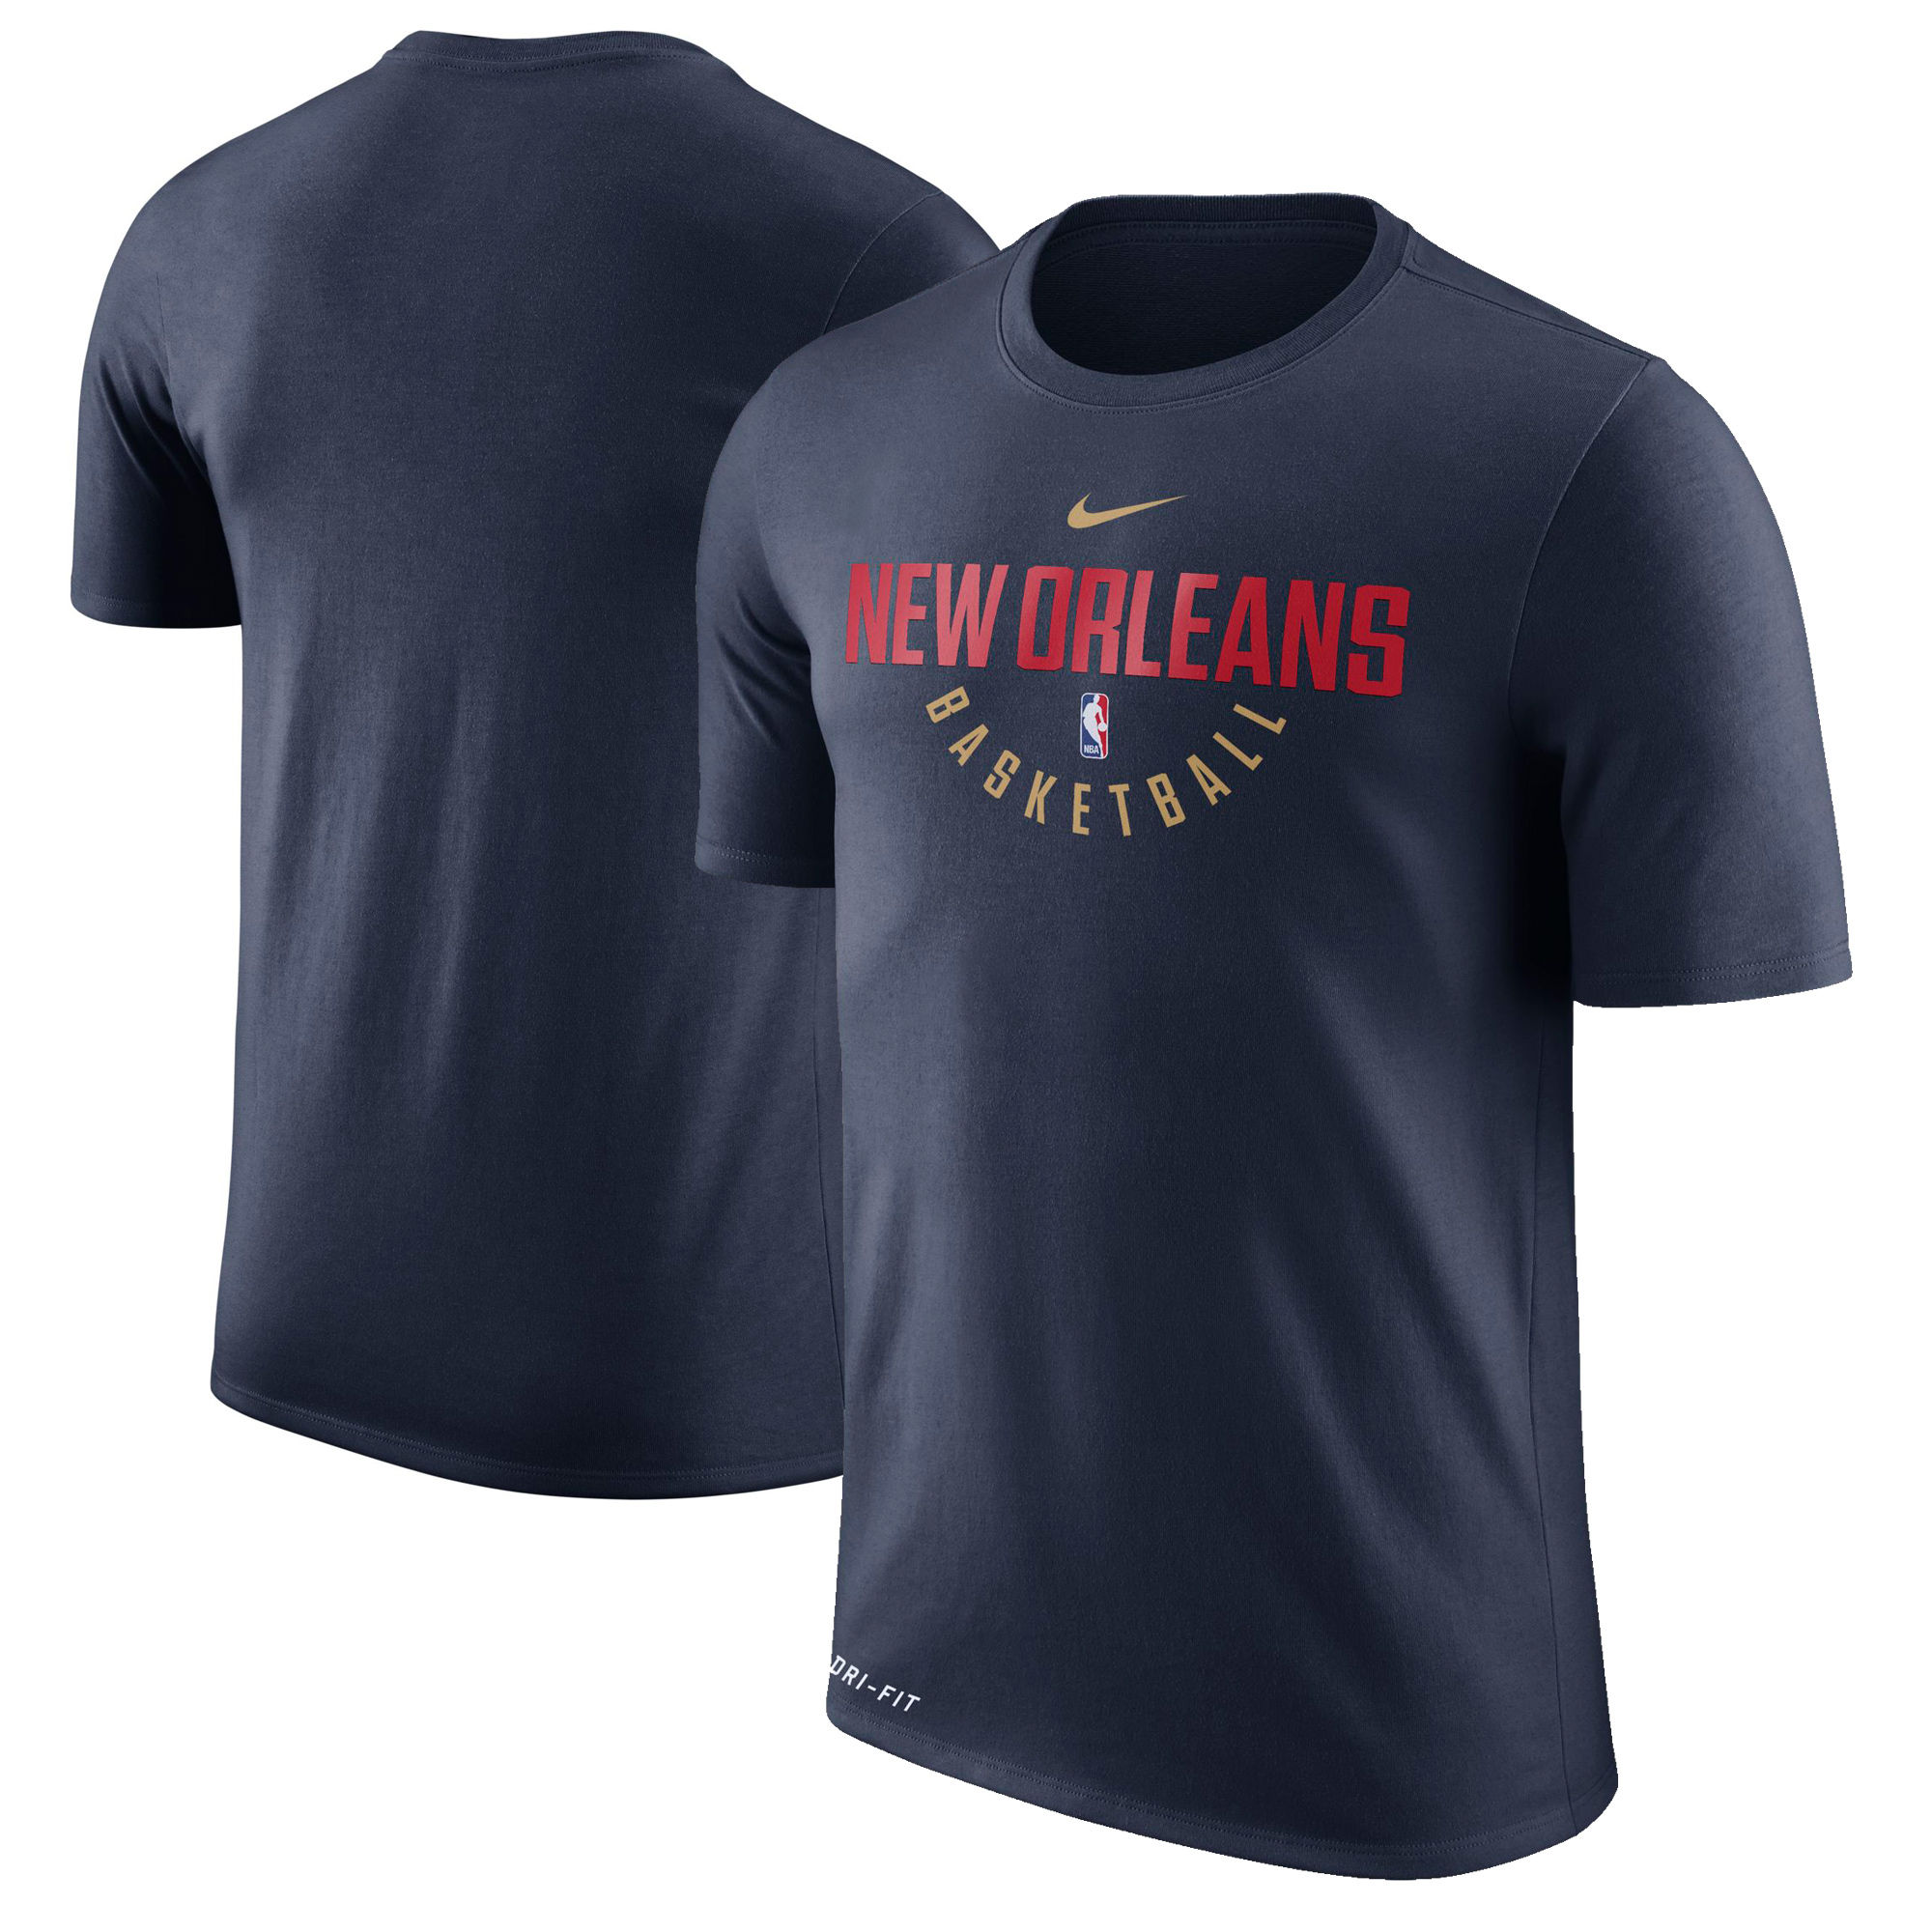 New Orleans Pelicans Navy Nike Practice Performance T-Shirt - Click Image to Close